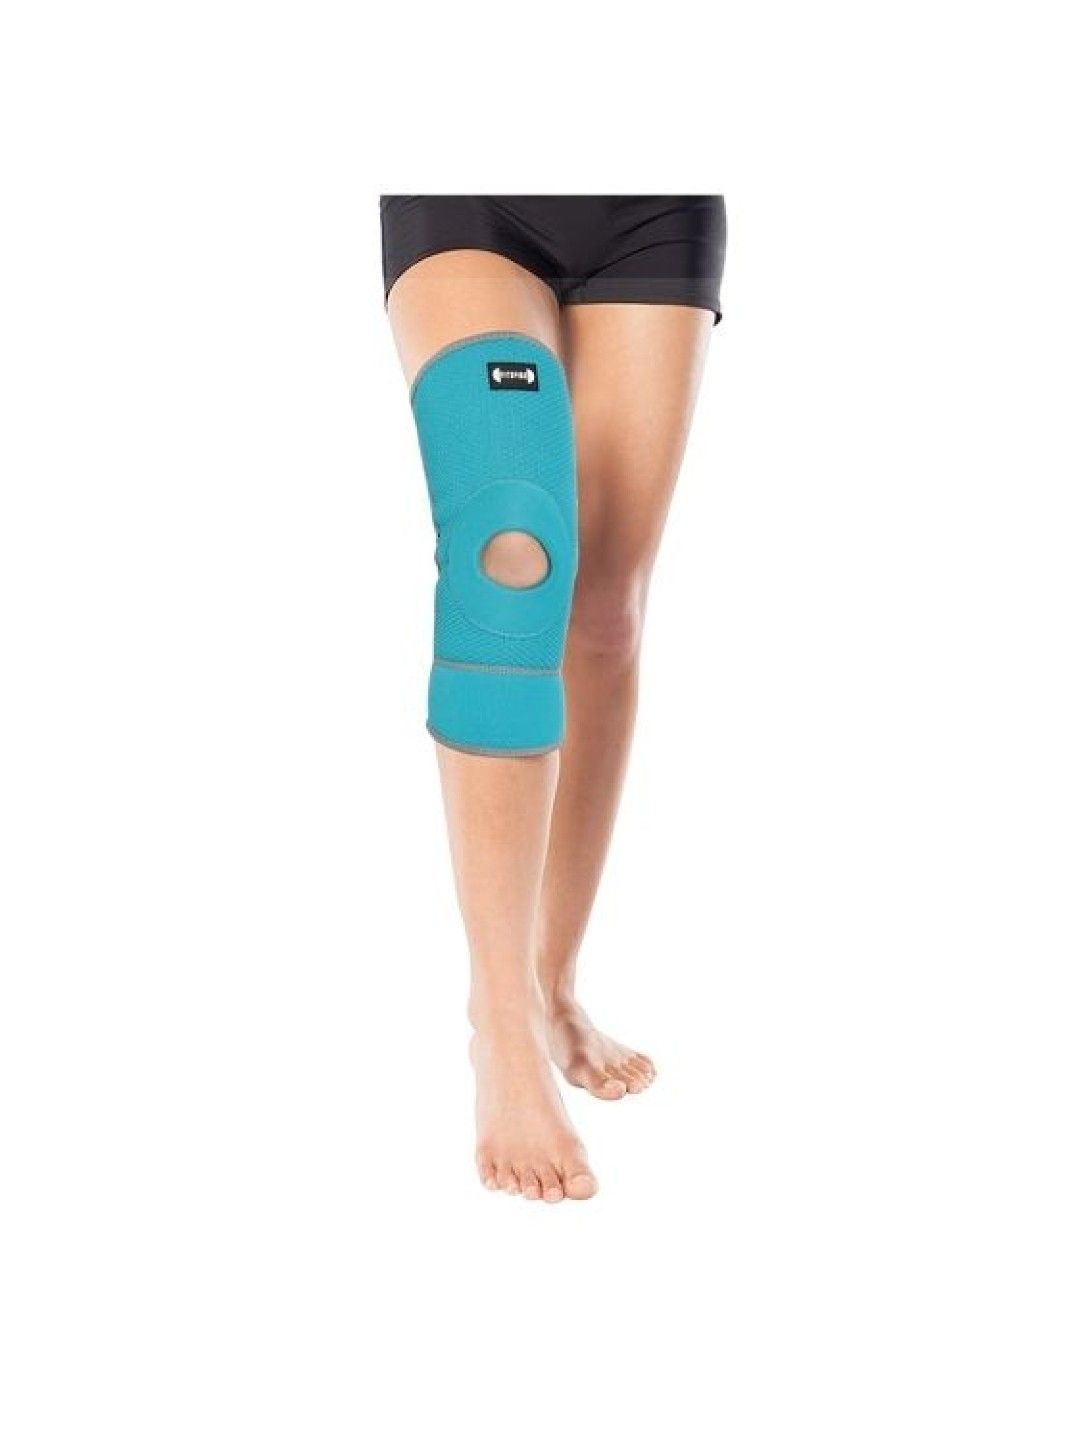 Sunbeams Lifestyle Fitspire Knee Support Small Exercise/Fitness/Gym/Workout Equipment